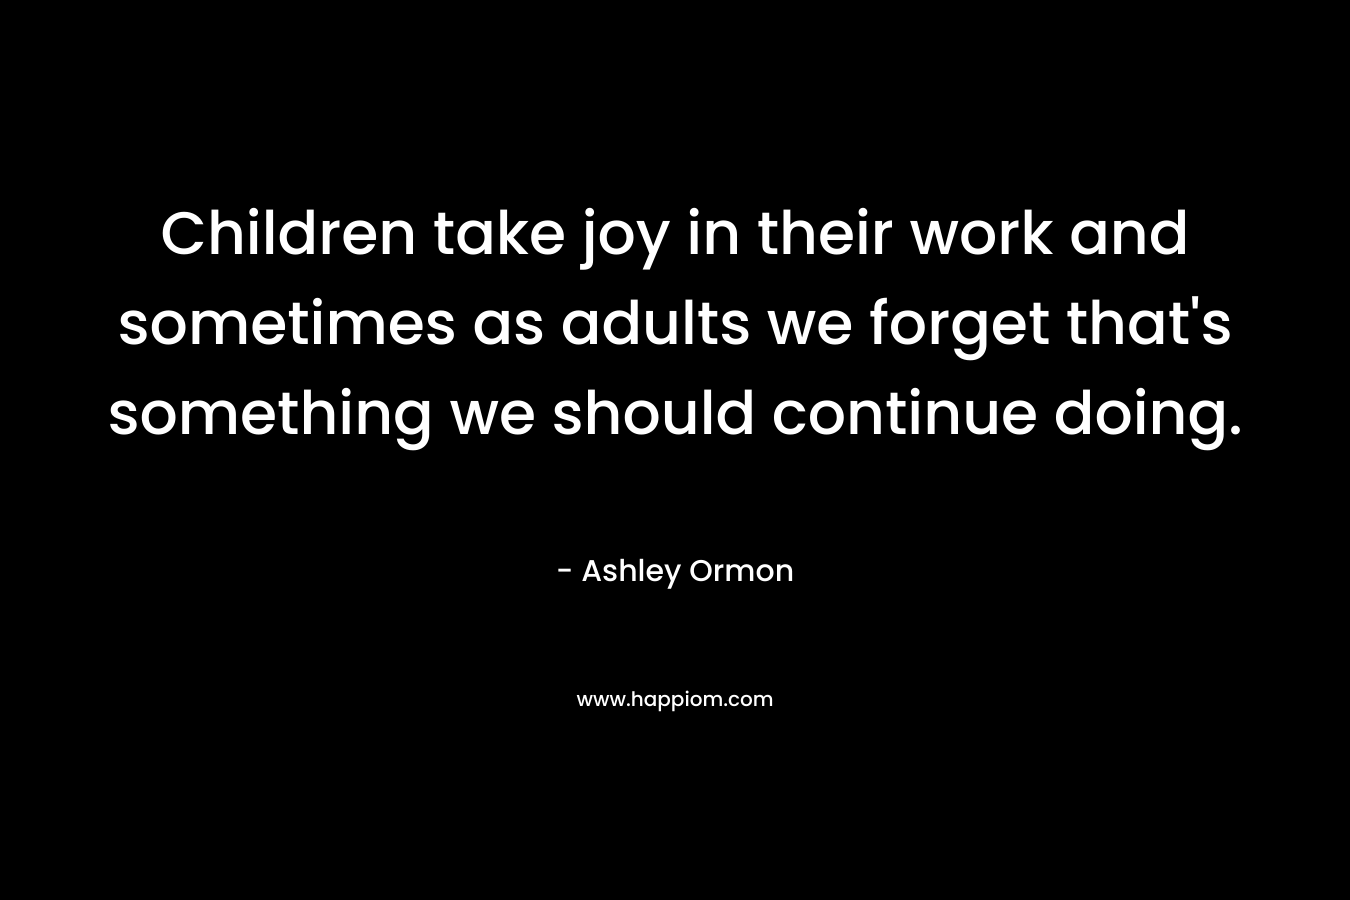 Children take joy in their work and sometimes as adults we forget that's something we should continue doing.